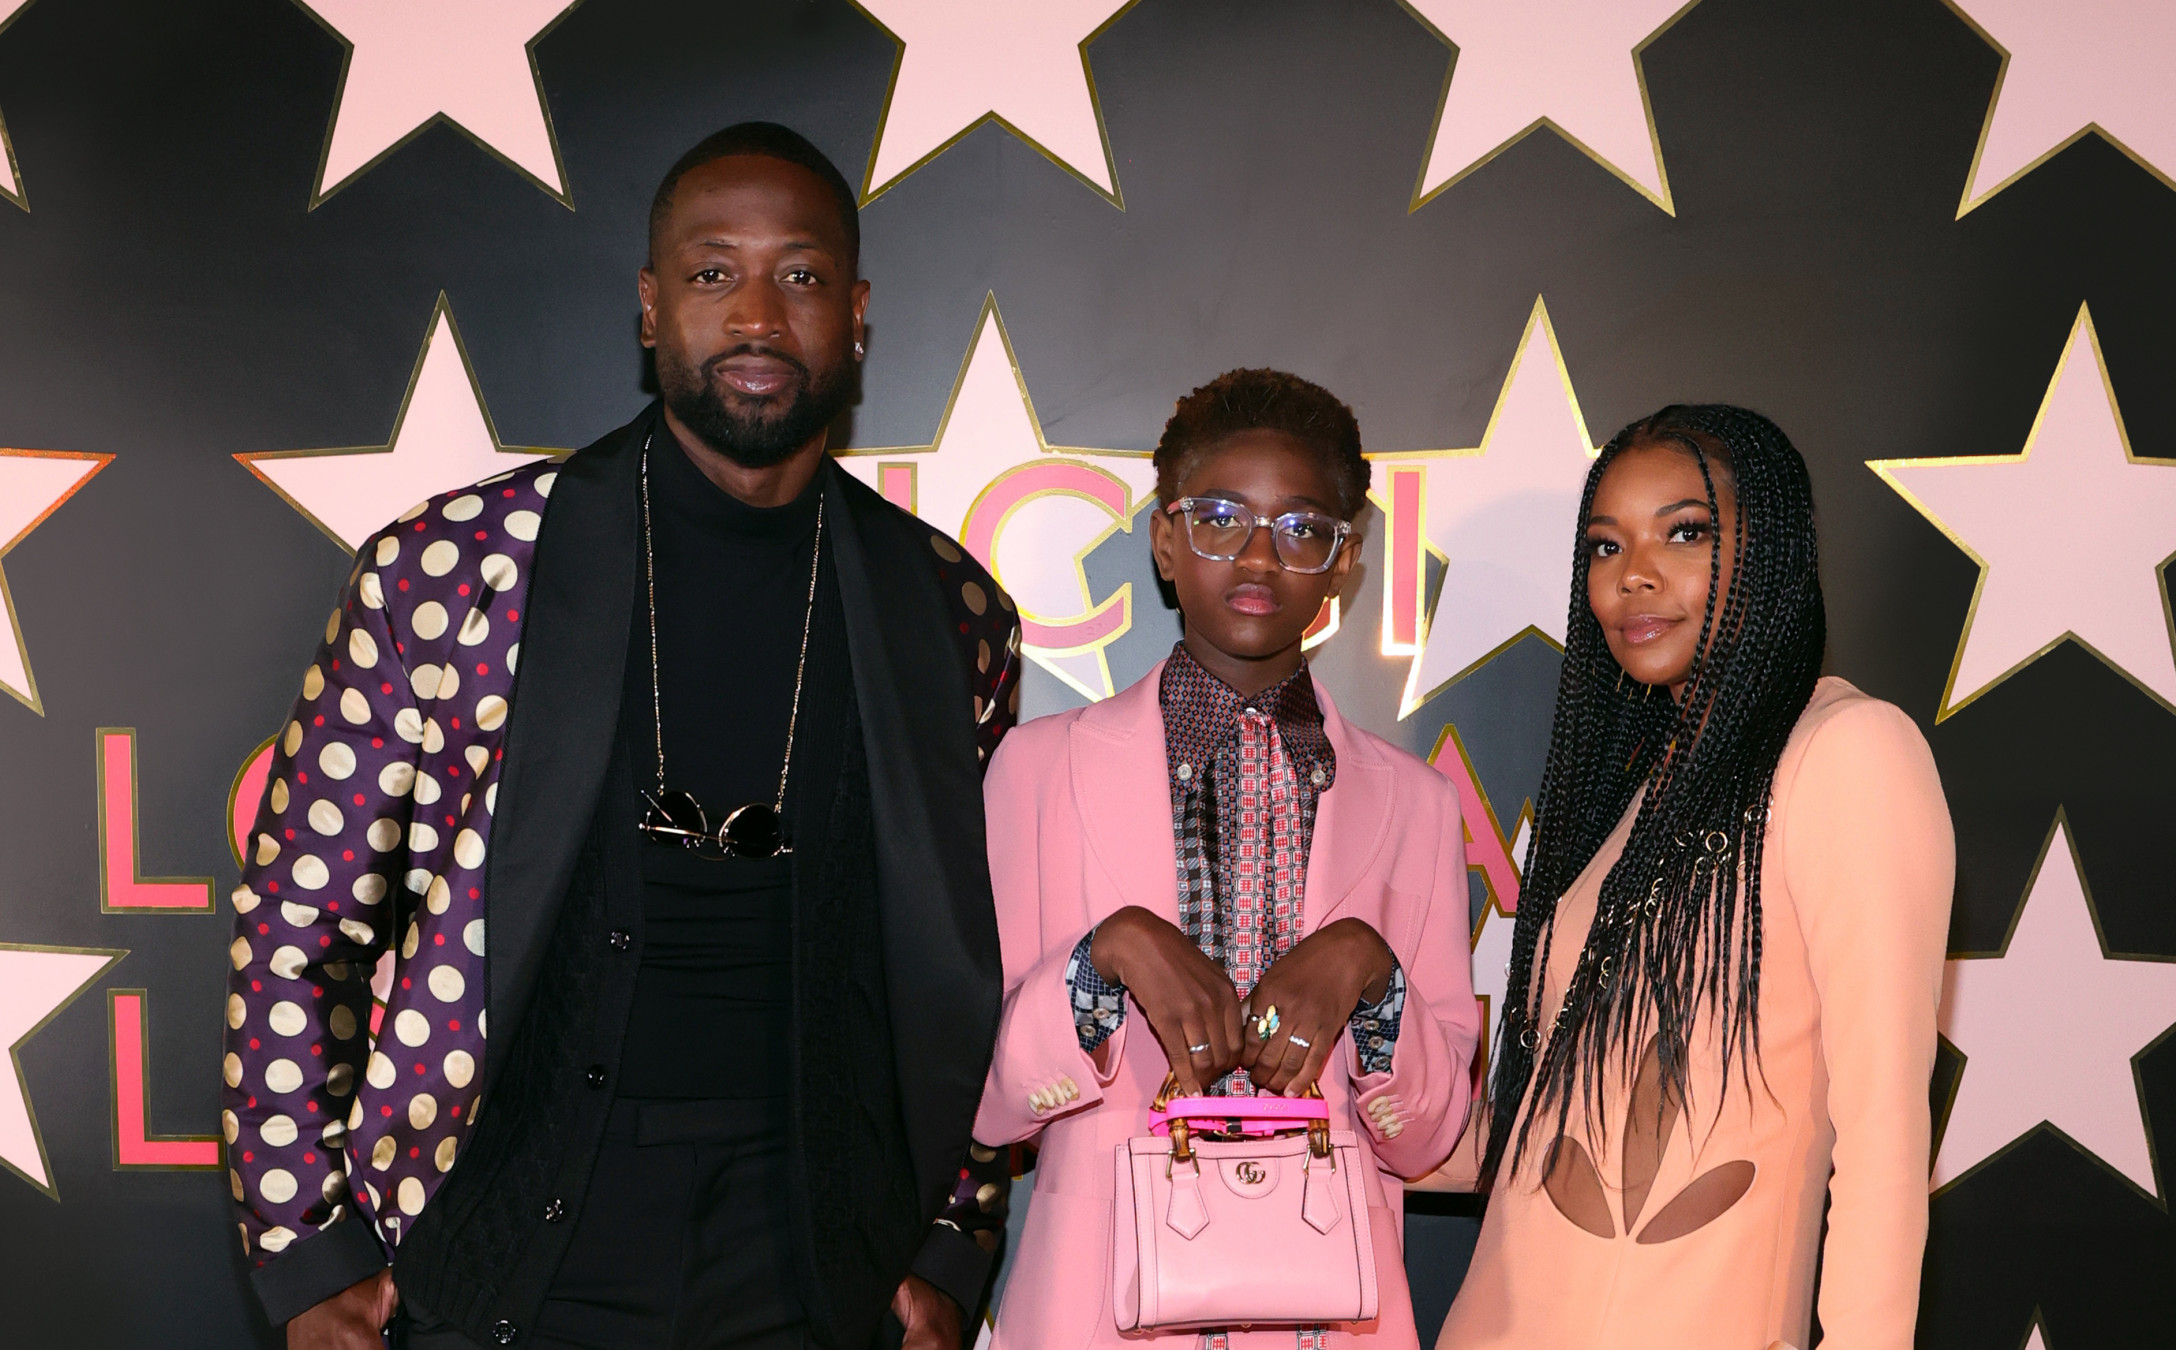 Dwyane Wades Daughter Has Been Granted a Name Change and Legal Transition by photo